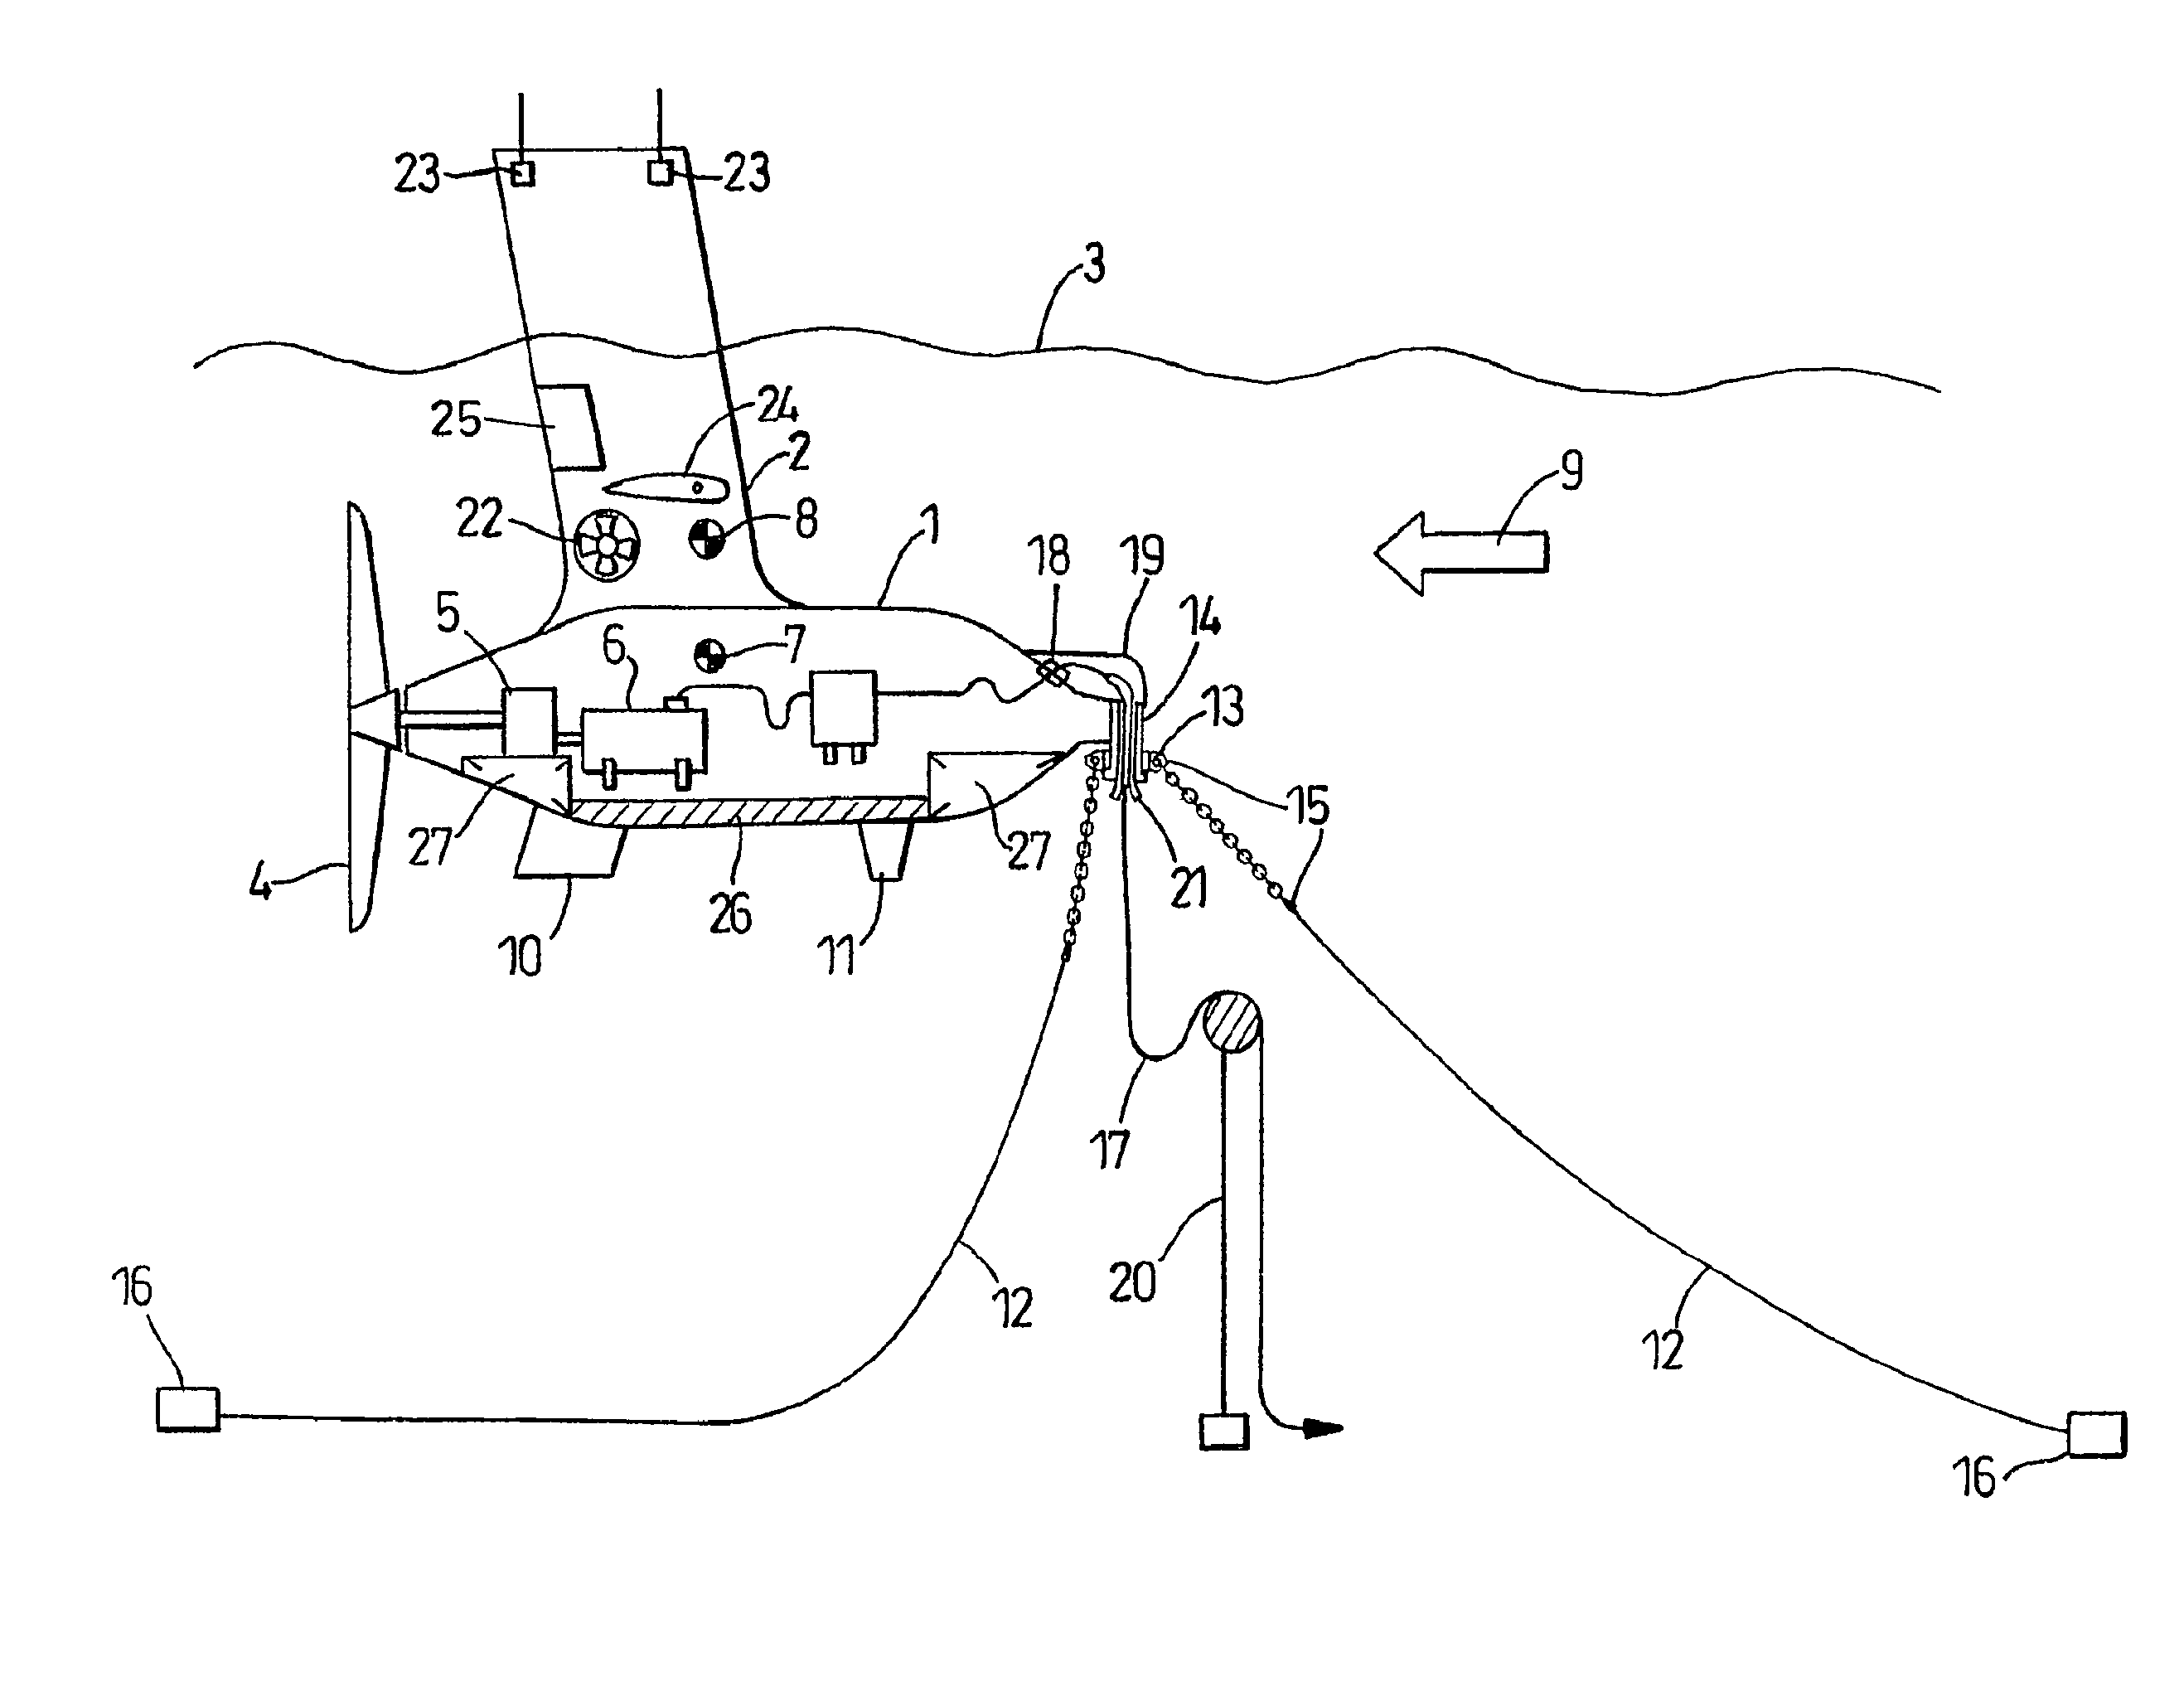 Floating apparatus for deploying in marine current for gaining energy